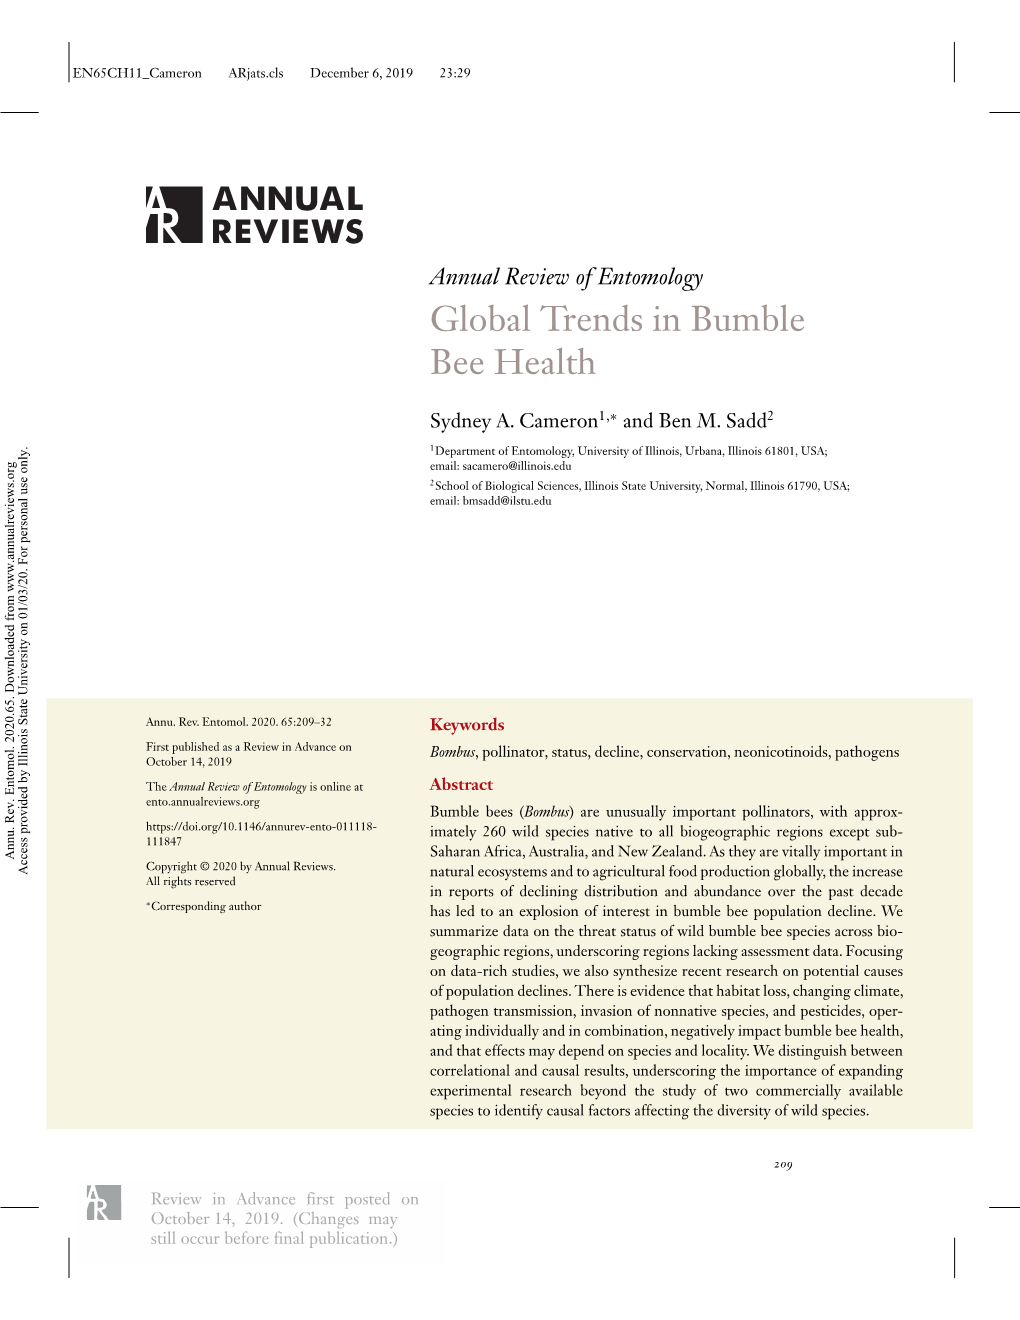 Global Trends in Bumble Bee Health